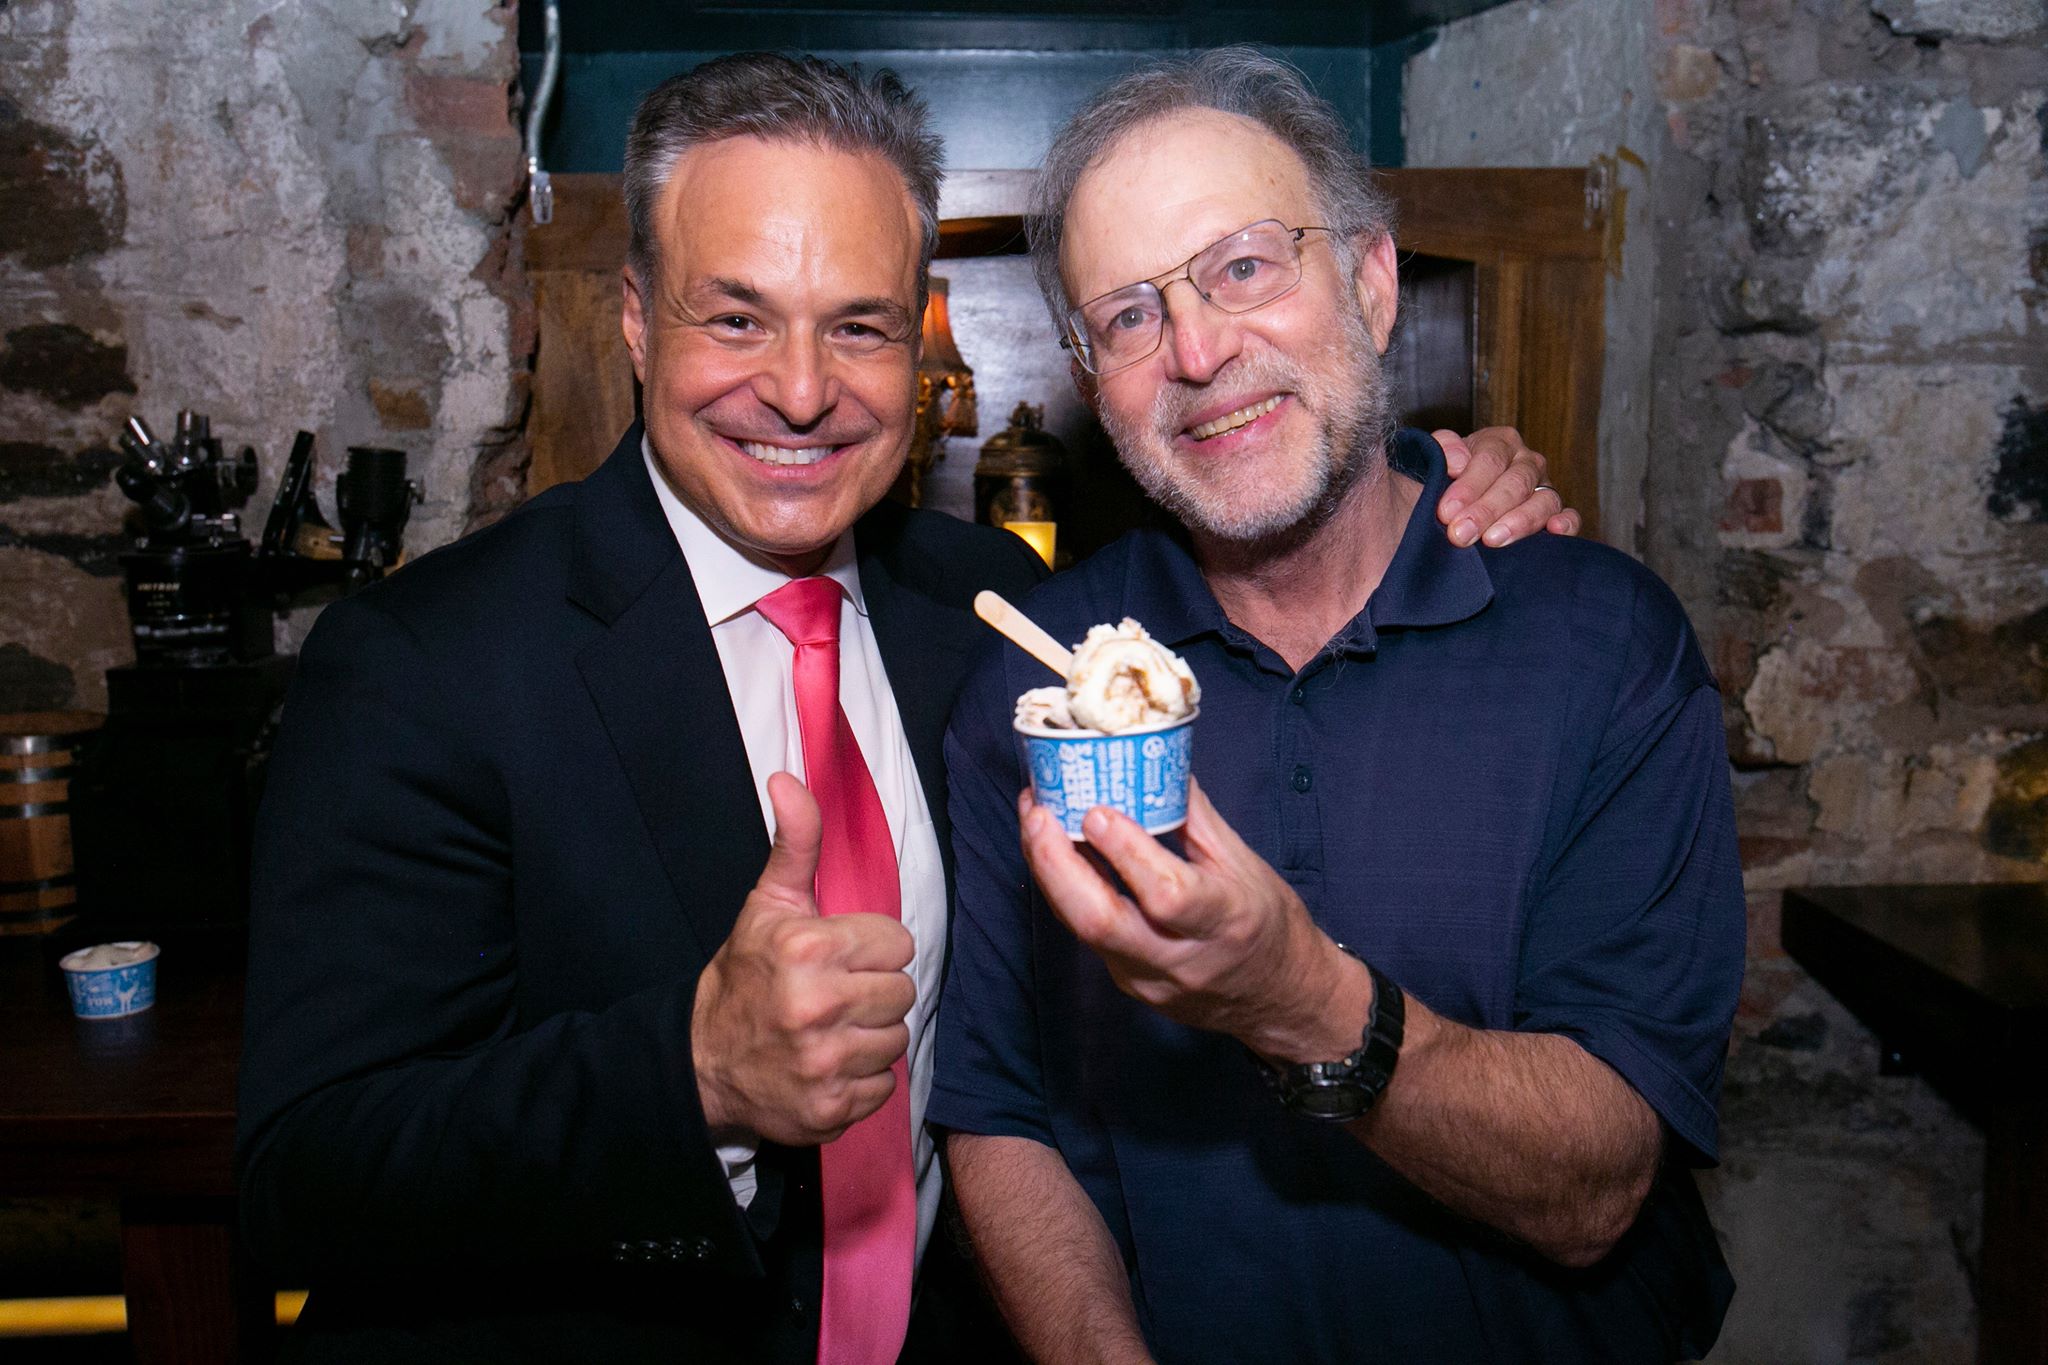 Clint Arthur and Ben & Jerry’s founder Jerry Greenfield at the “Living Legends of Entrepreneurial Marketing” epic Ice cream networking extravaganza